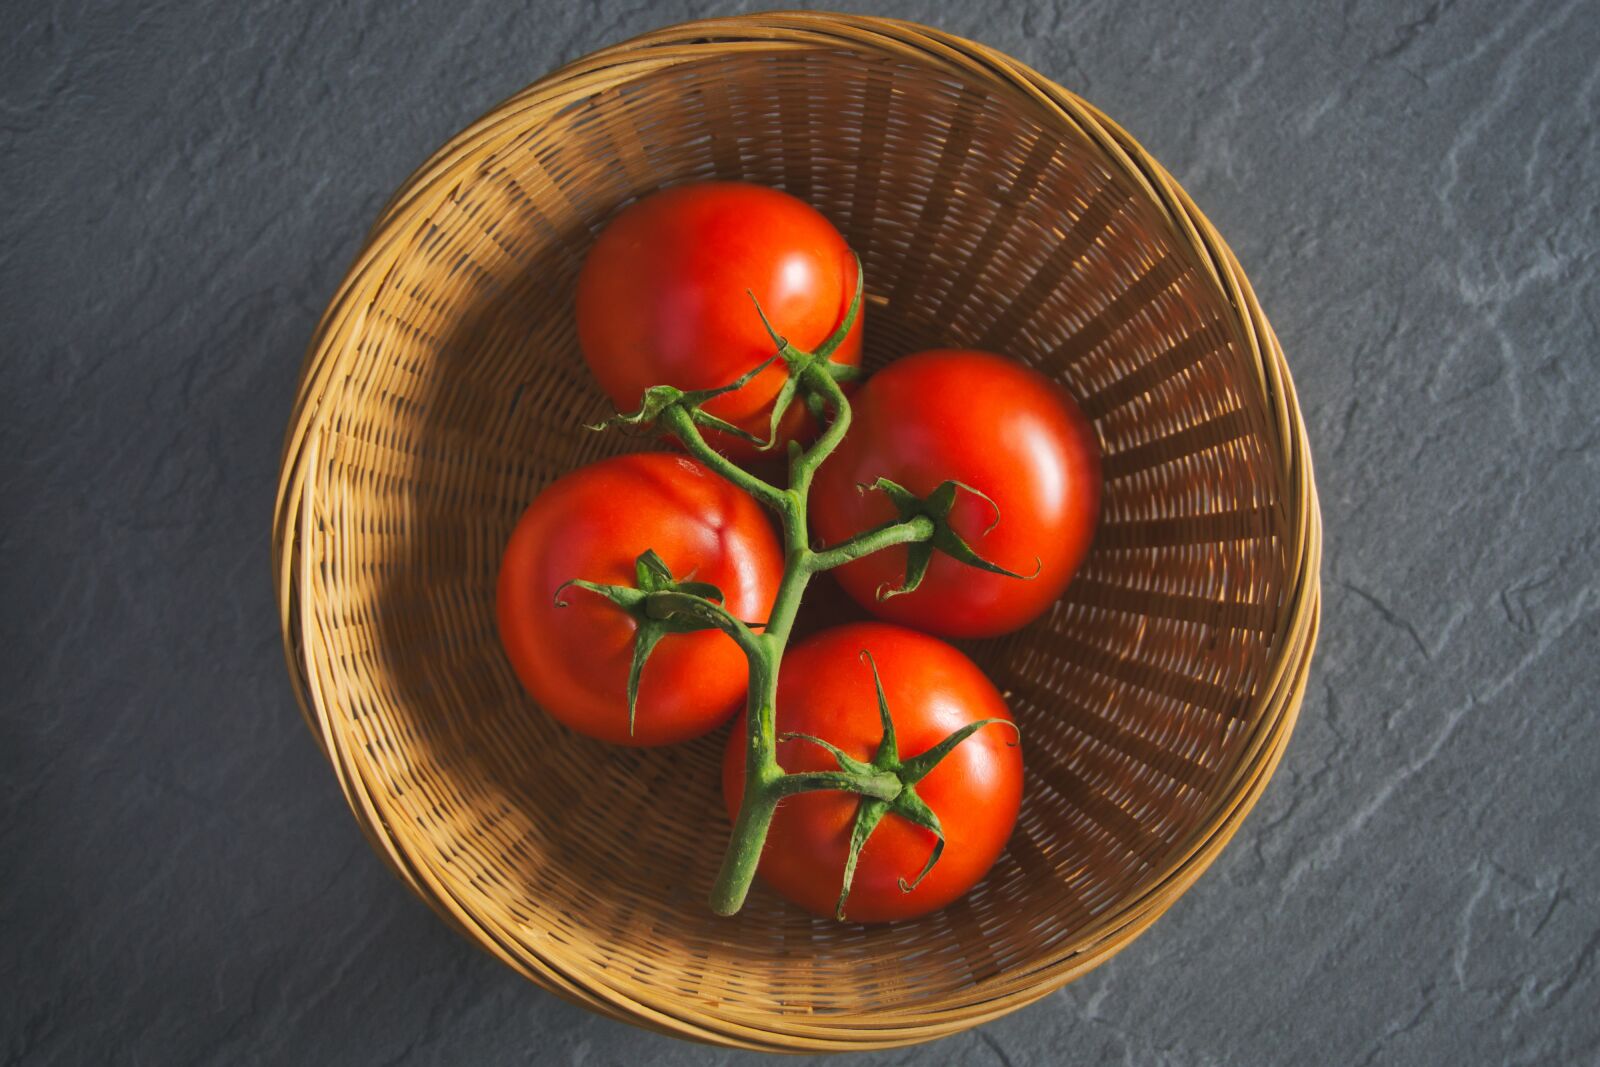 Sony a6000 sample photo. Tomatoes, basket, vegetables photography